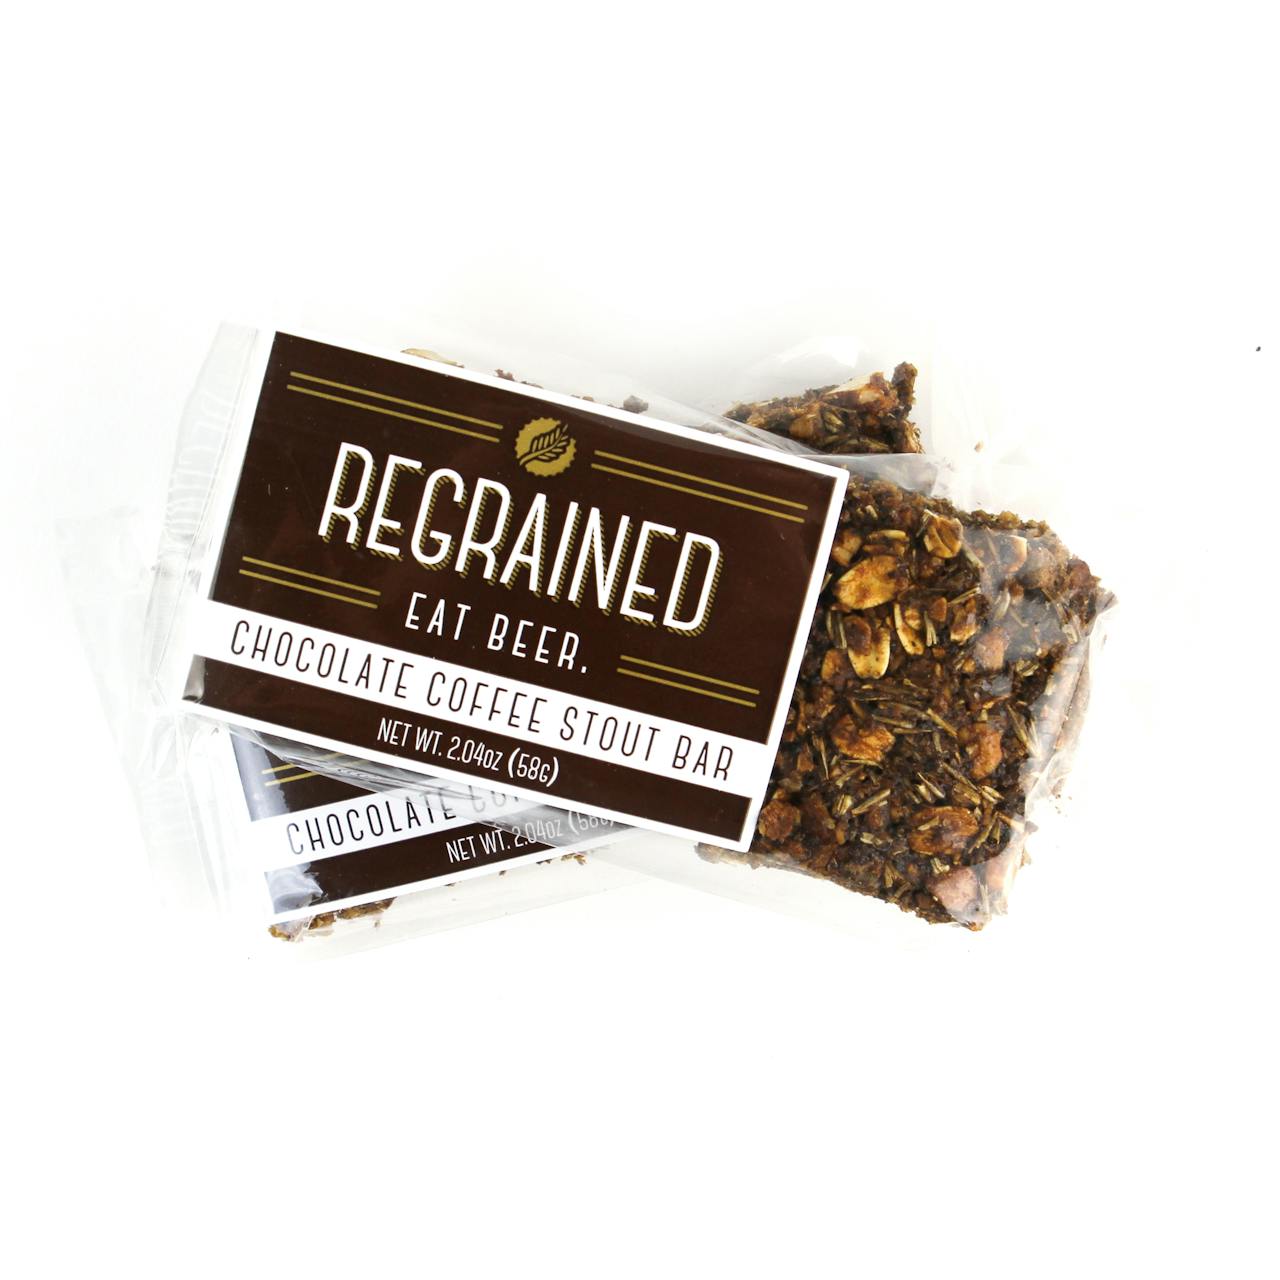 ReGrained 12-Pack Chocolate-Coffee Stout Bars